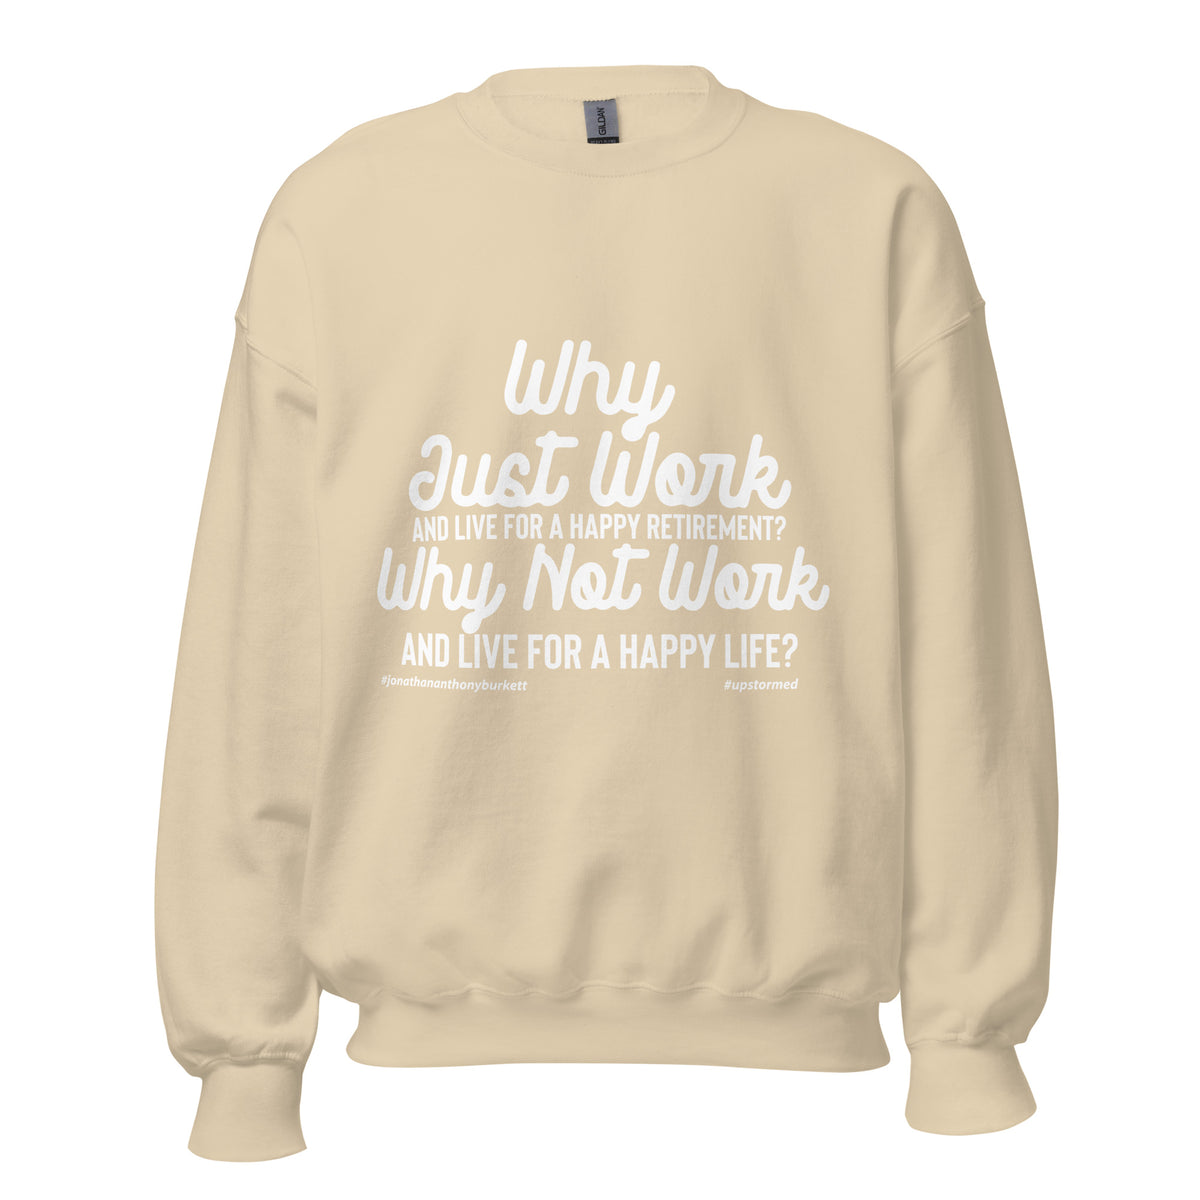 Why Just Work And Live For A Happy Retirement Upstormed Sweatshirt